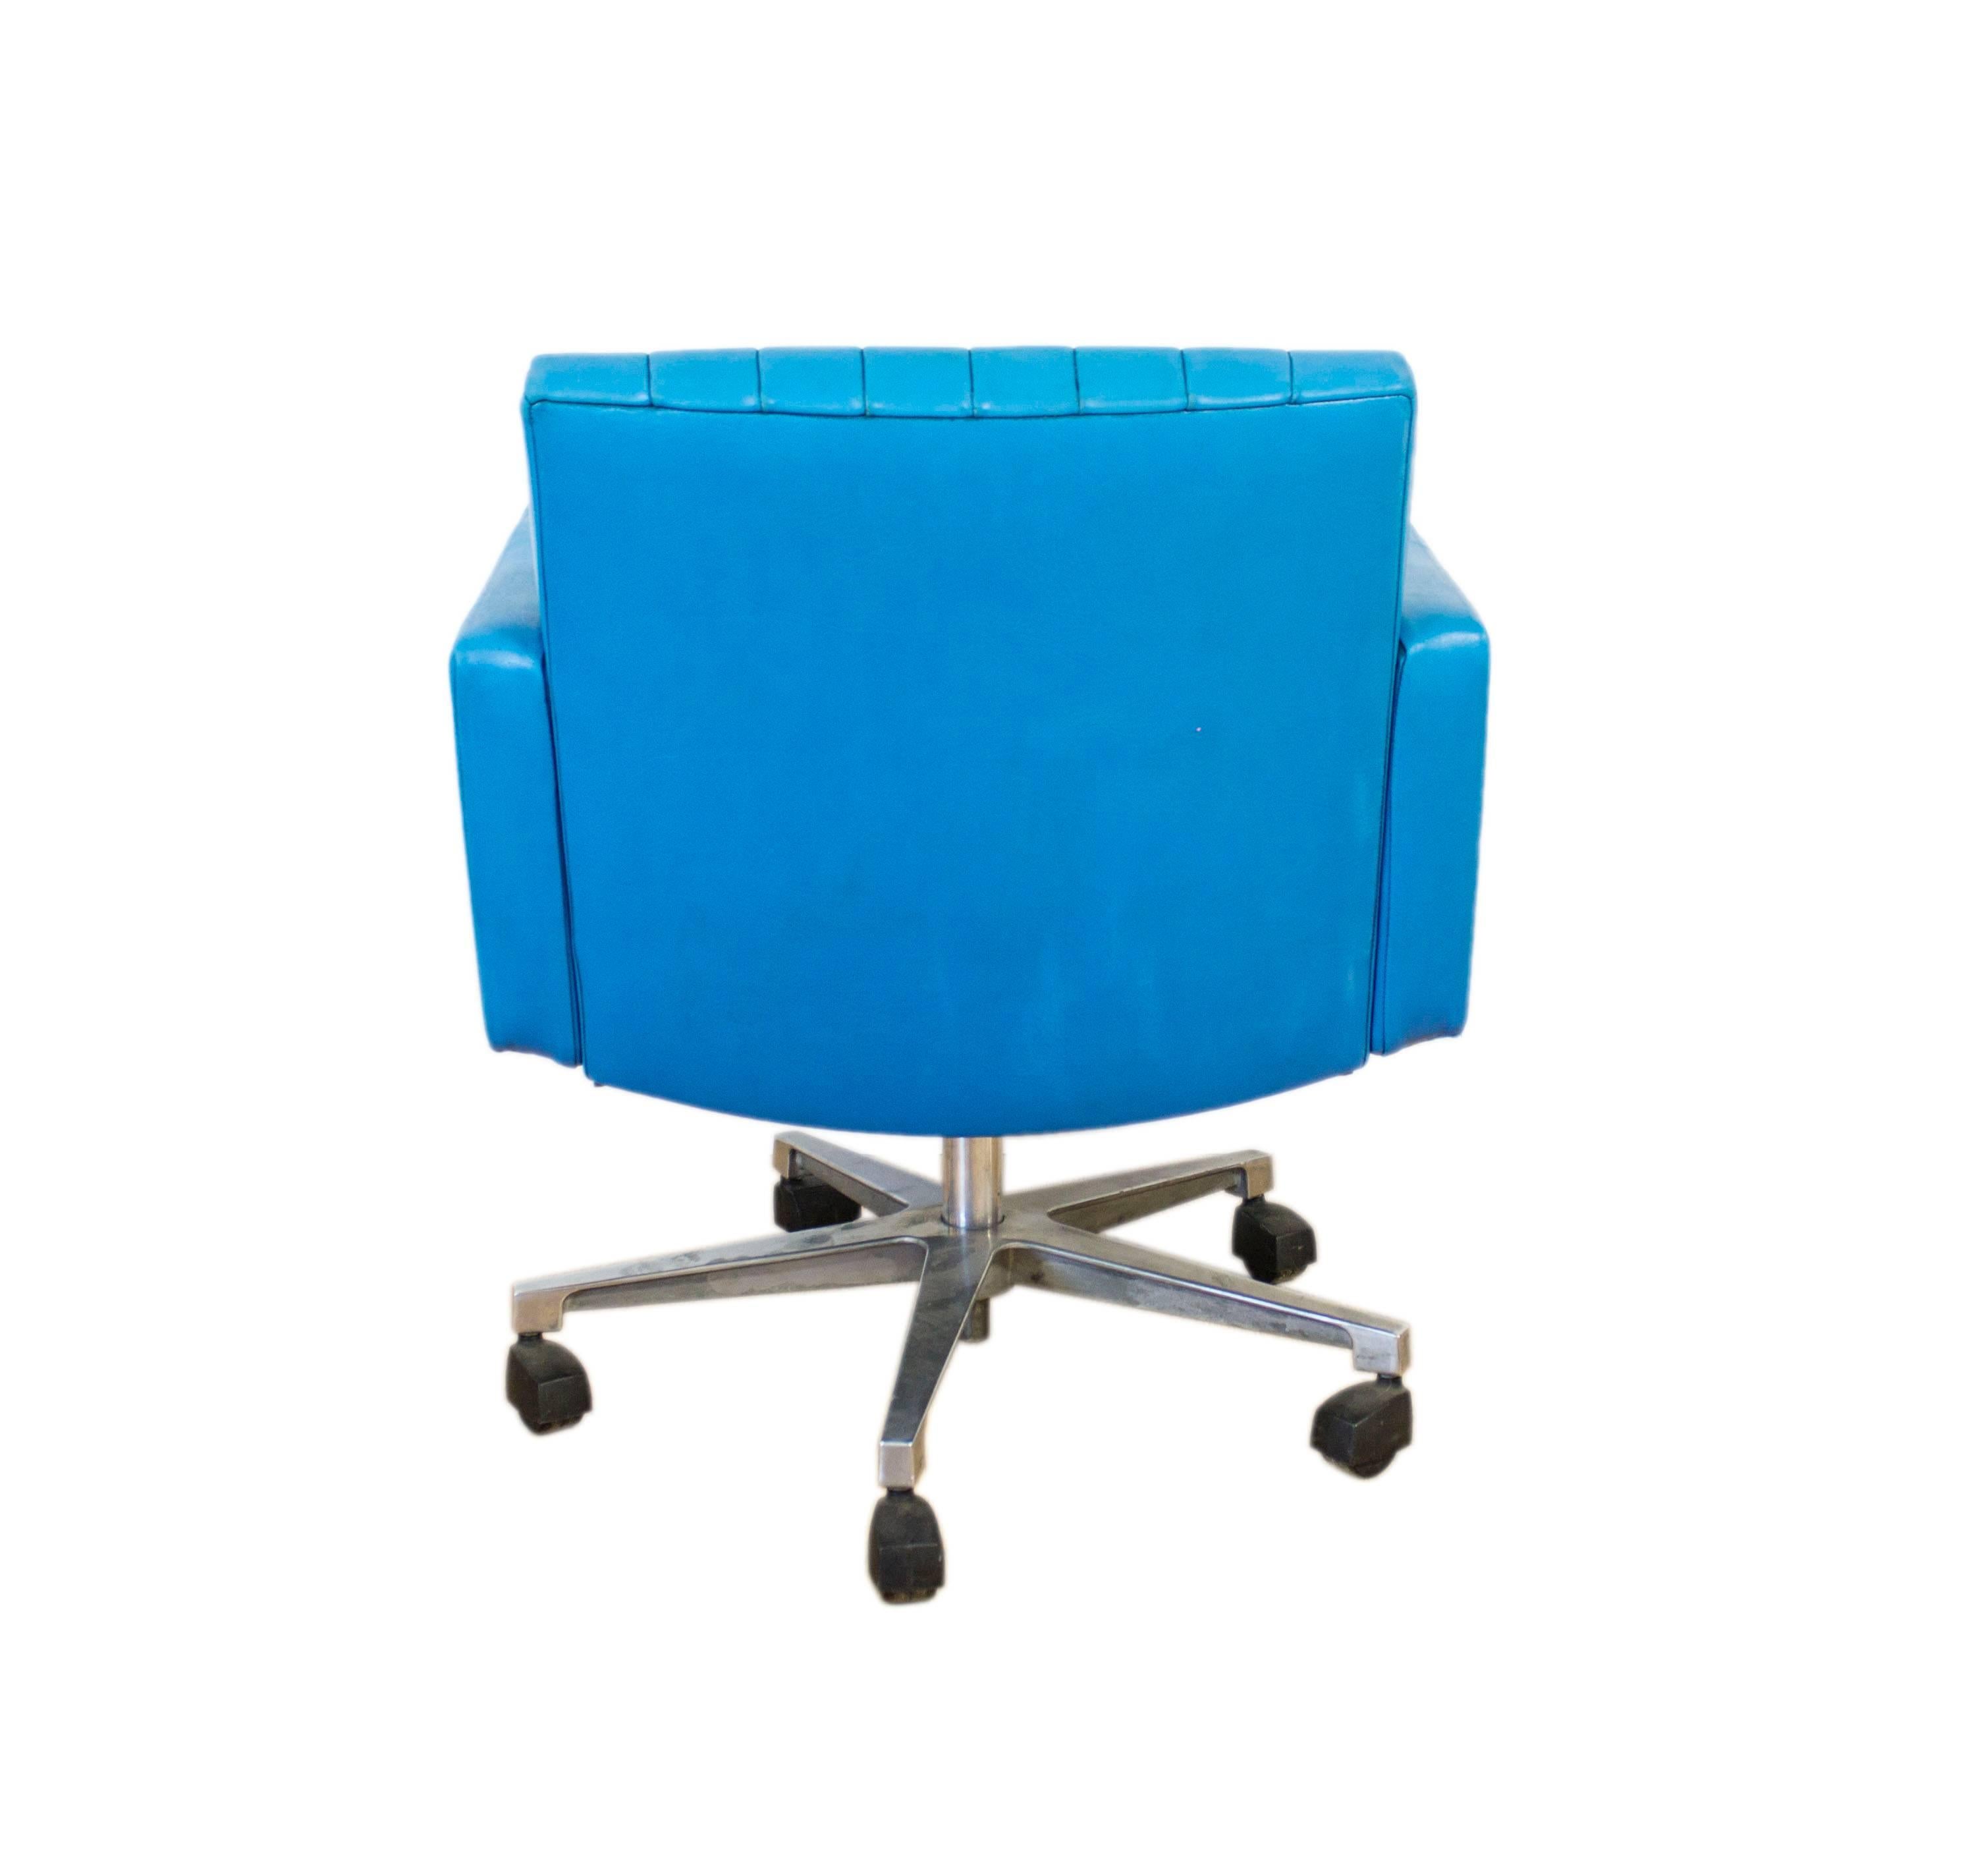 British Turquoise Leather Swivel Armchair Desk Chair Retro G Plan Eames Era For Sale